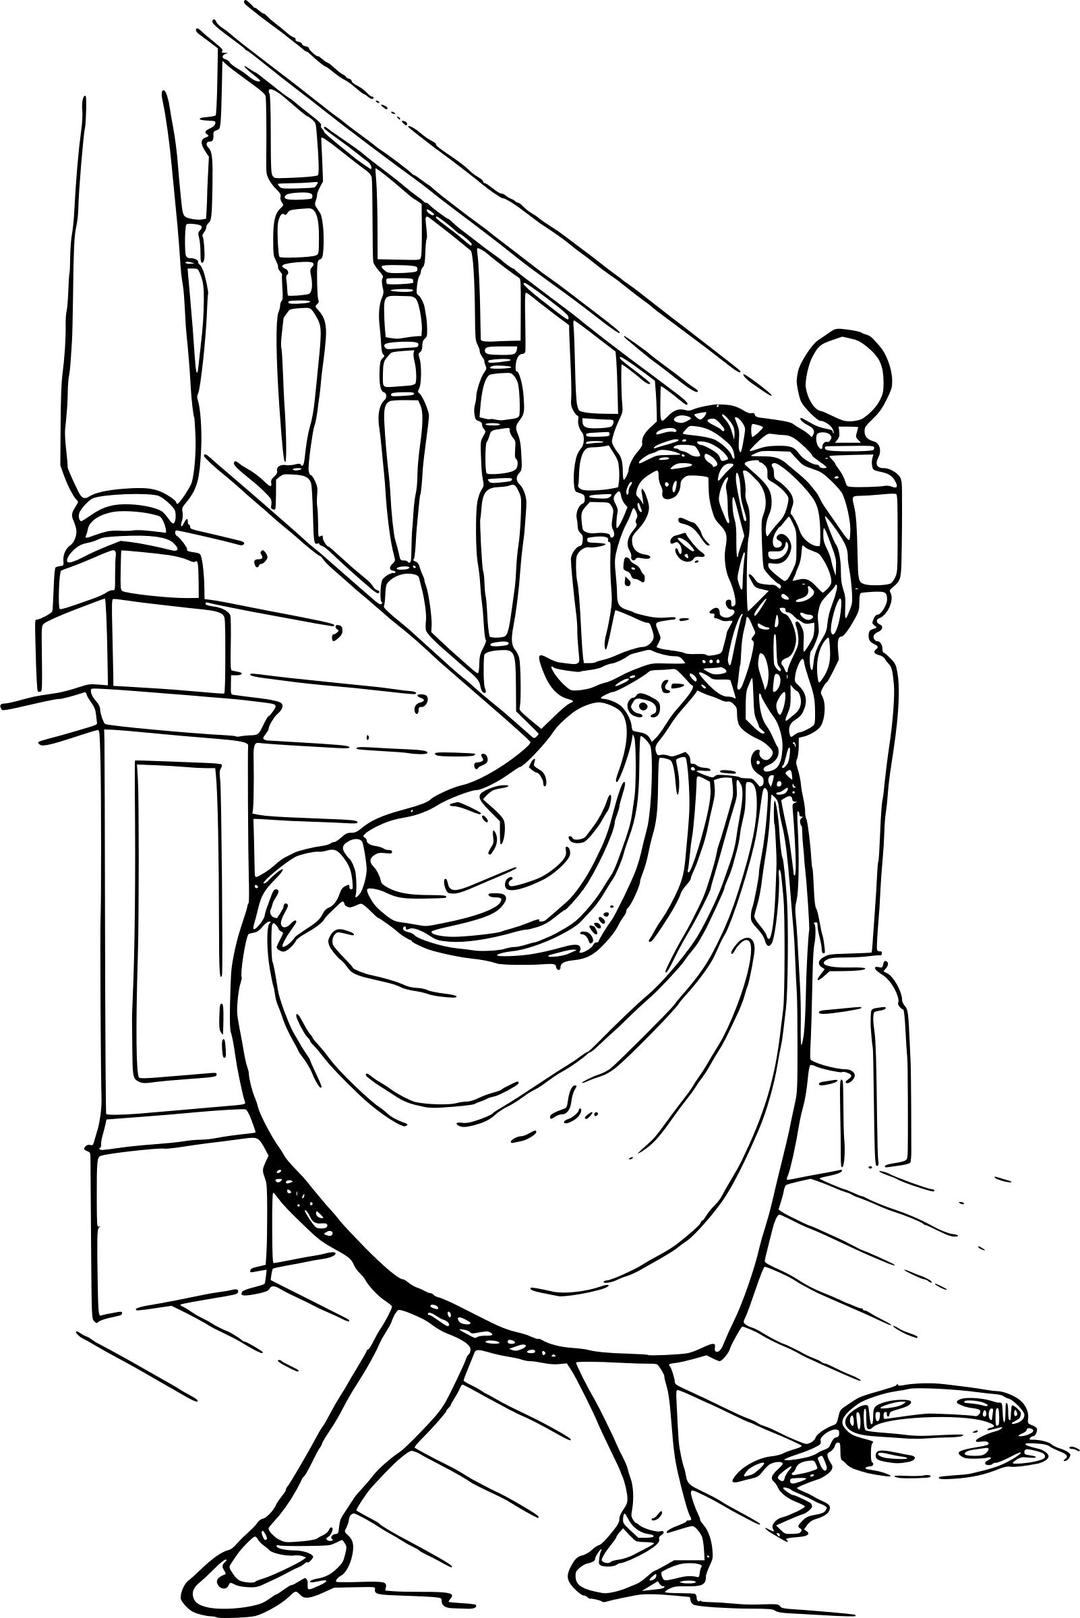 Dancing Girl and Stairs png transparent